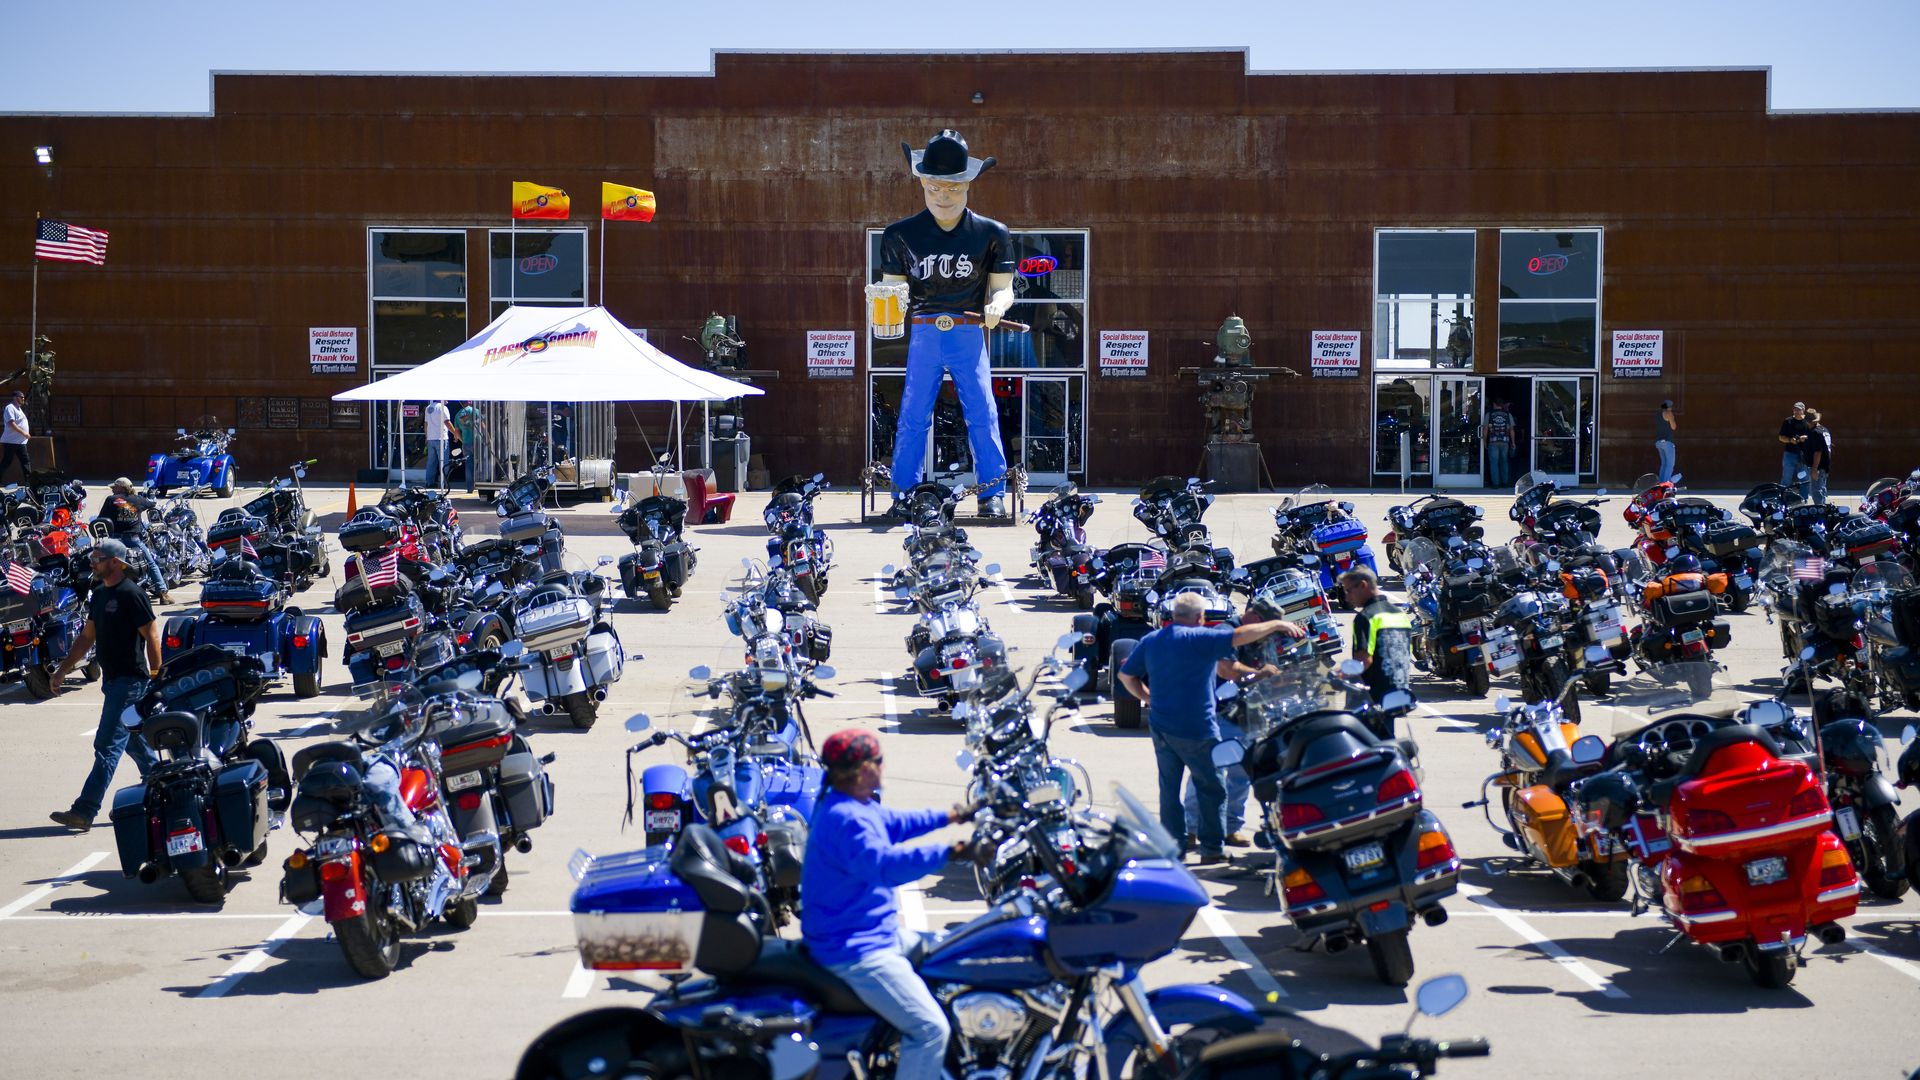 A motorcycle rider looks for parking outside the Full Throttle Saloon during the 80th Annual Sturgis Motorcycle Rally in Sturgis, South Dakota on August 9,